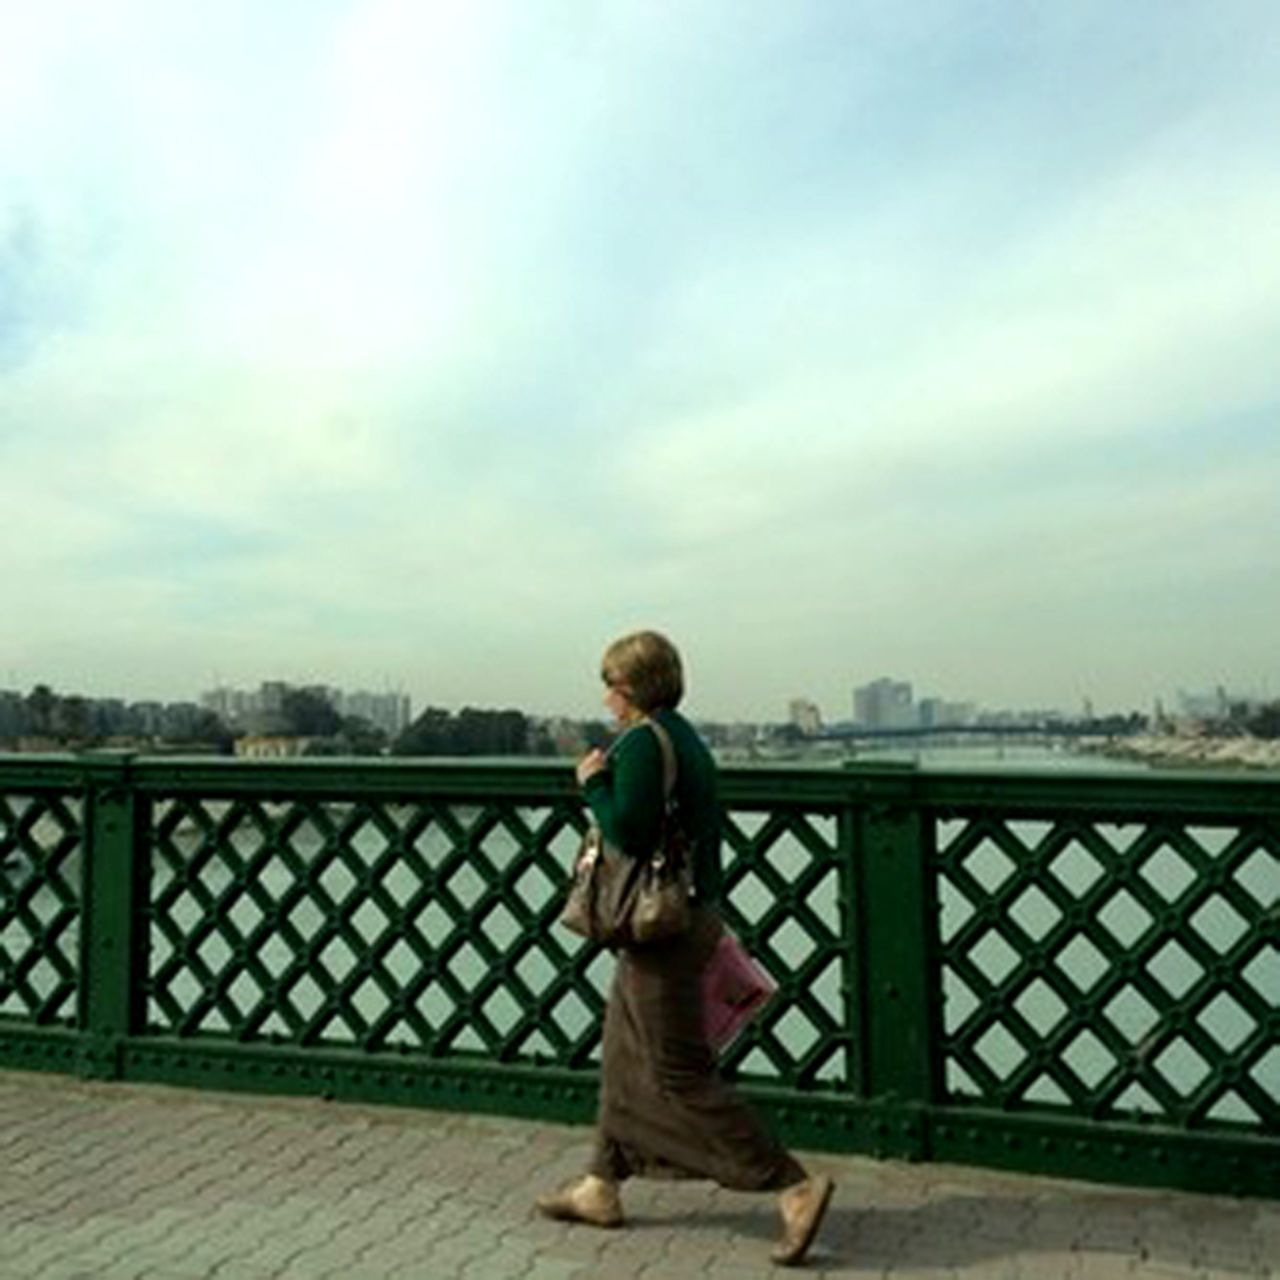 In this image taken on January 15, a woman walks through central Baghdad, Iraq, crossing a bridge over the Tigris River. CNN's Michael Holmes is in the Iraqi capital for the first time in two years. Click through to see images from Holmes and CNN producer Hamdi Alkhshali.